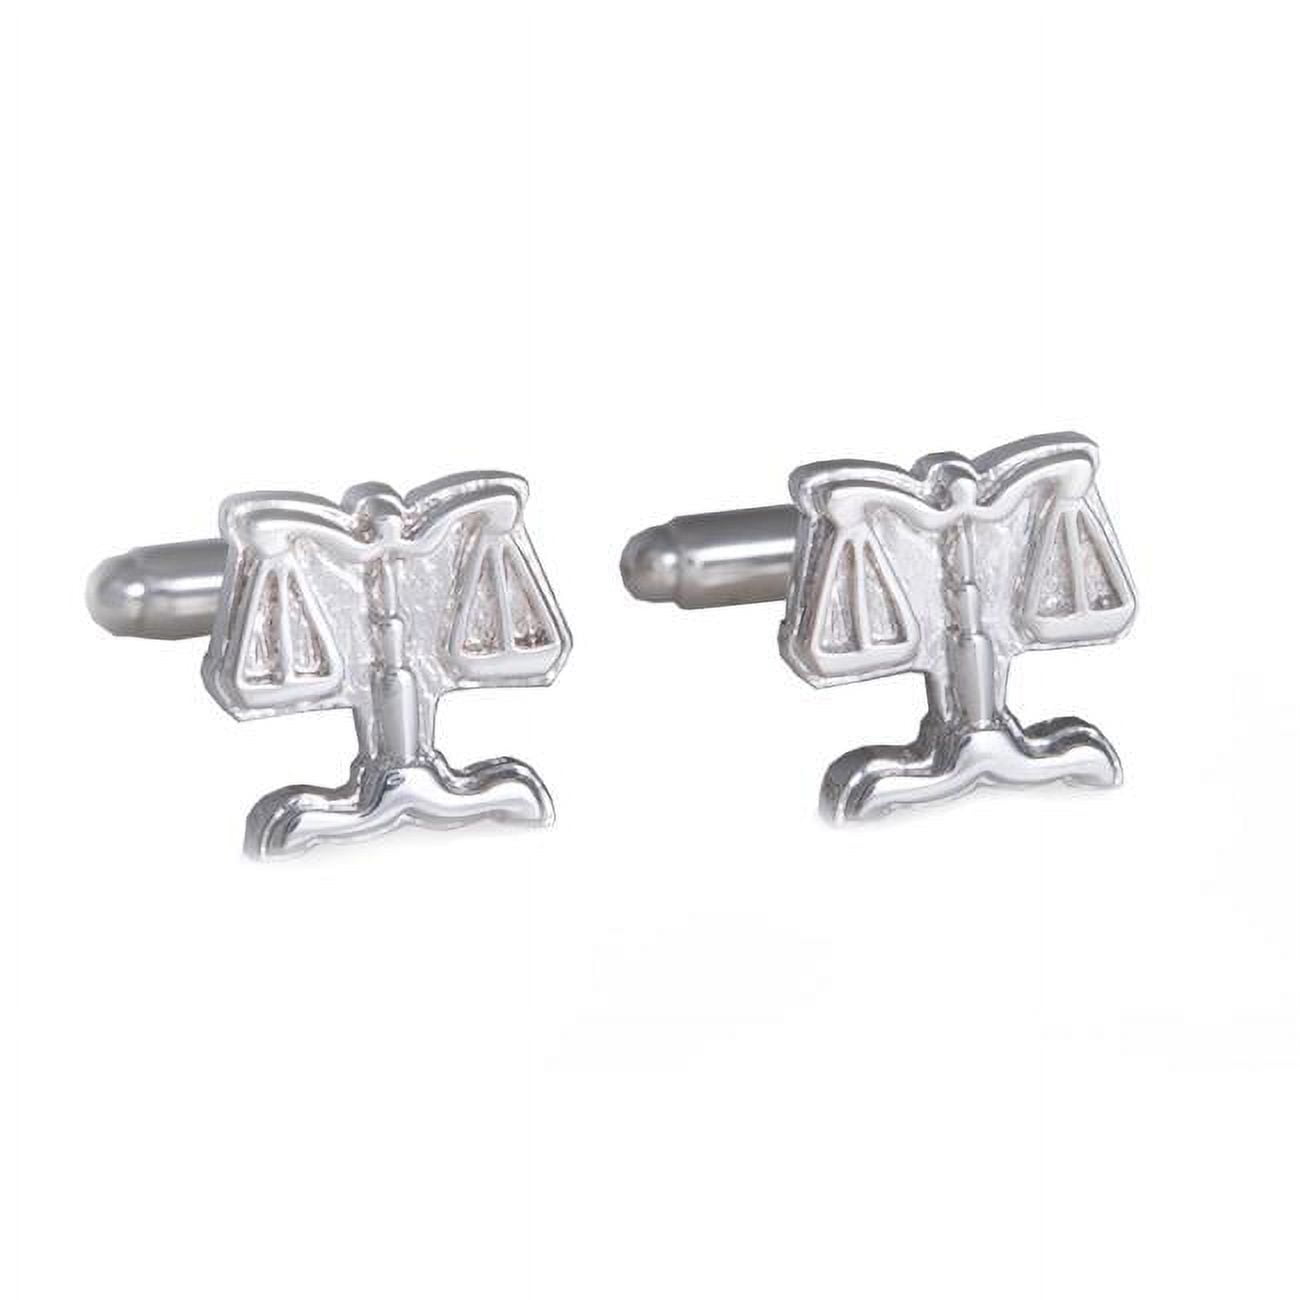 Picture of Bey-Berk International J137 Rhodium Plated Cufflinks with Legal Scales Design - Silver